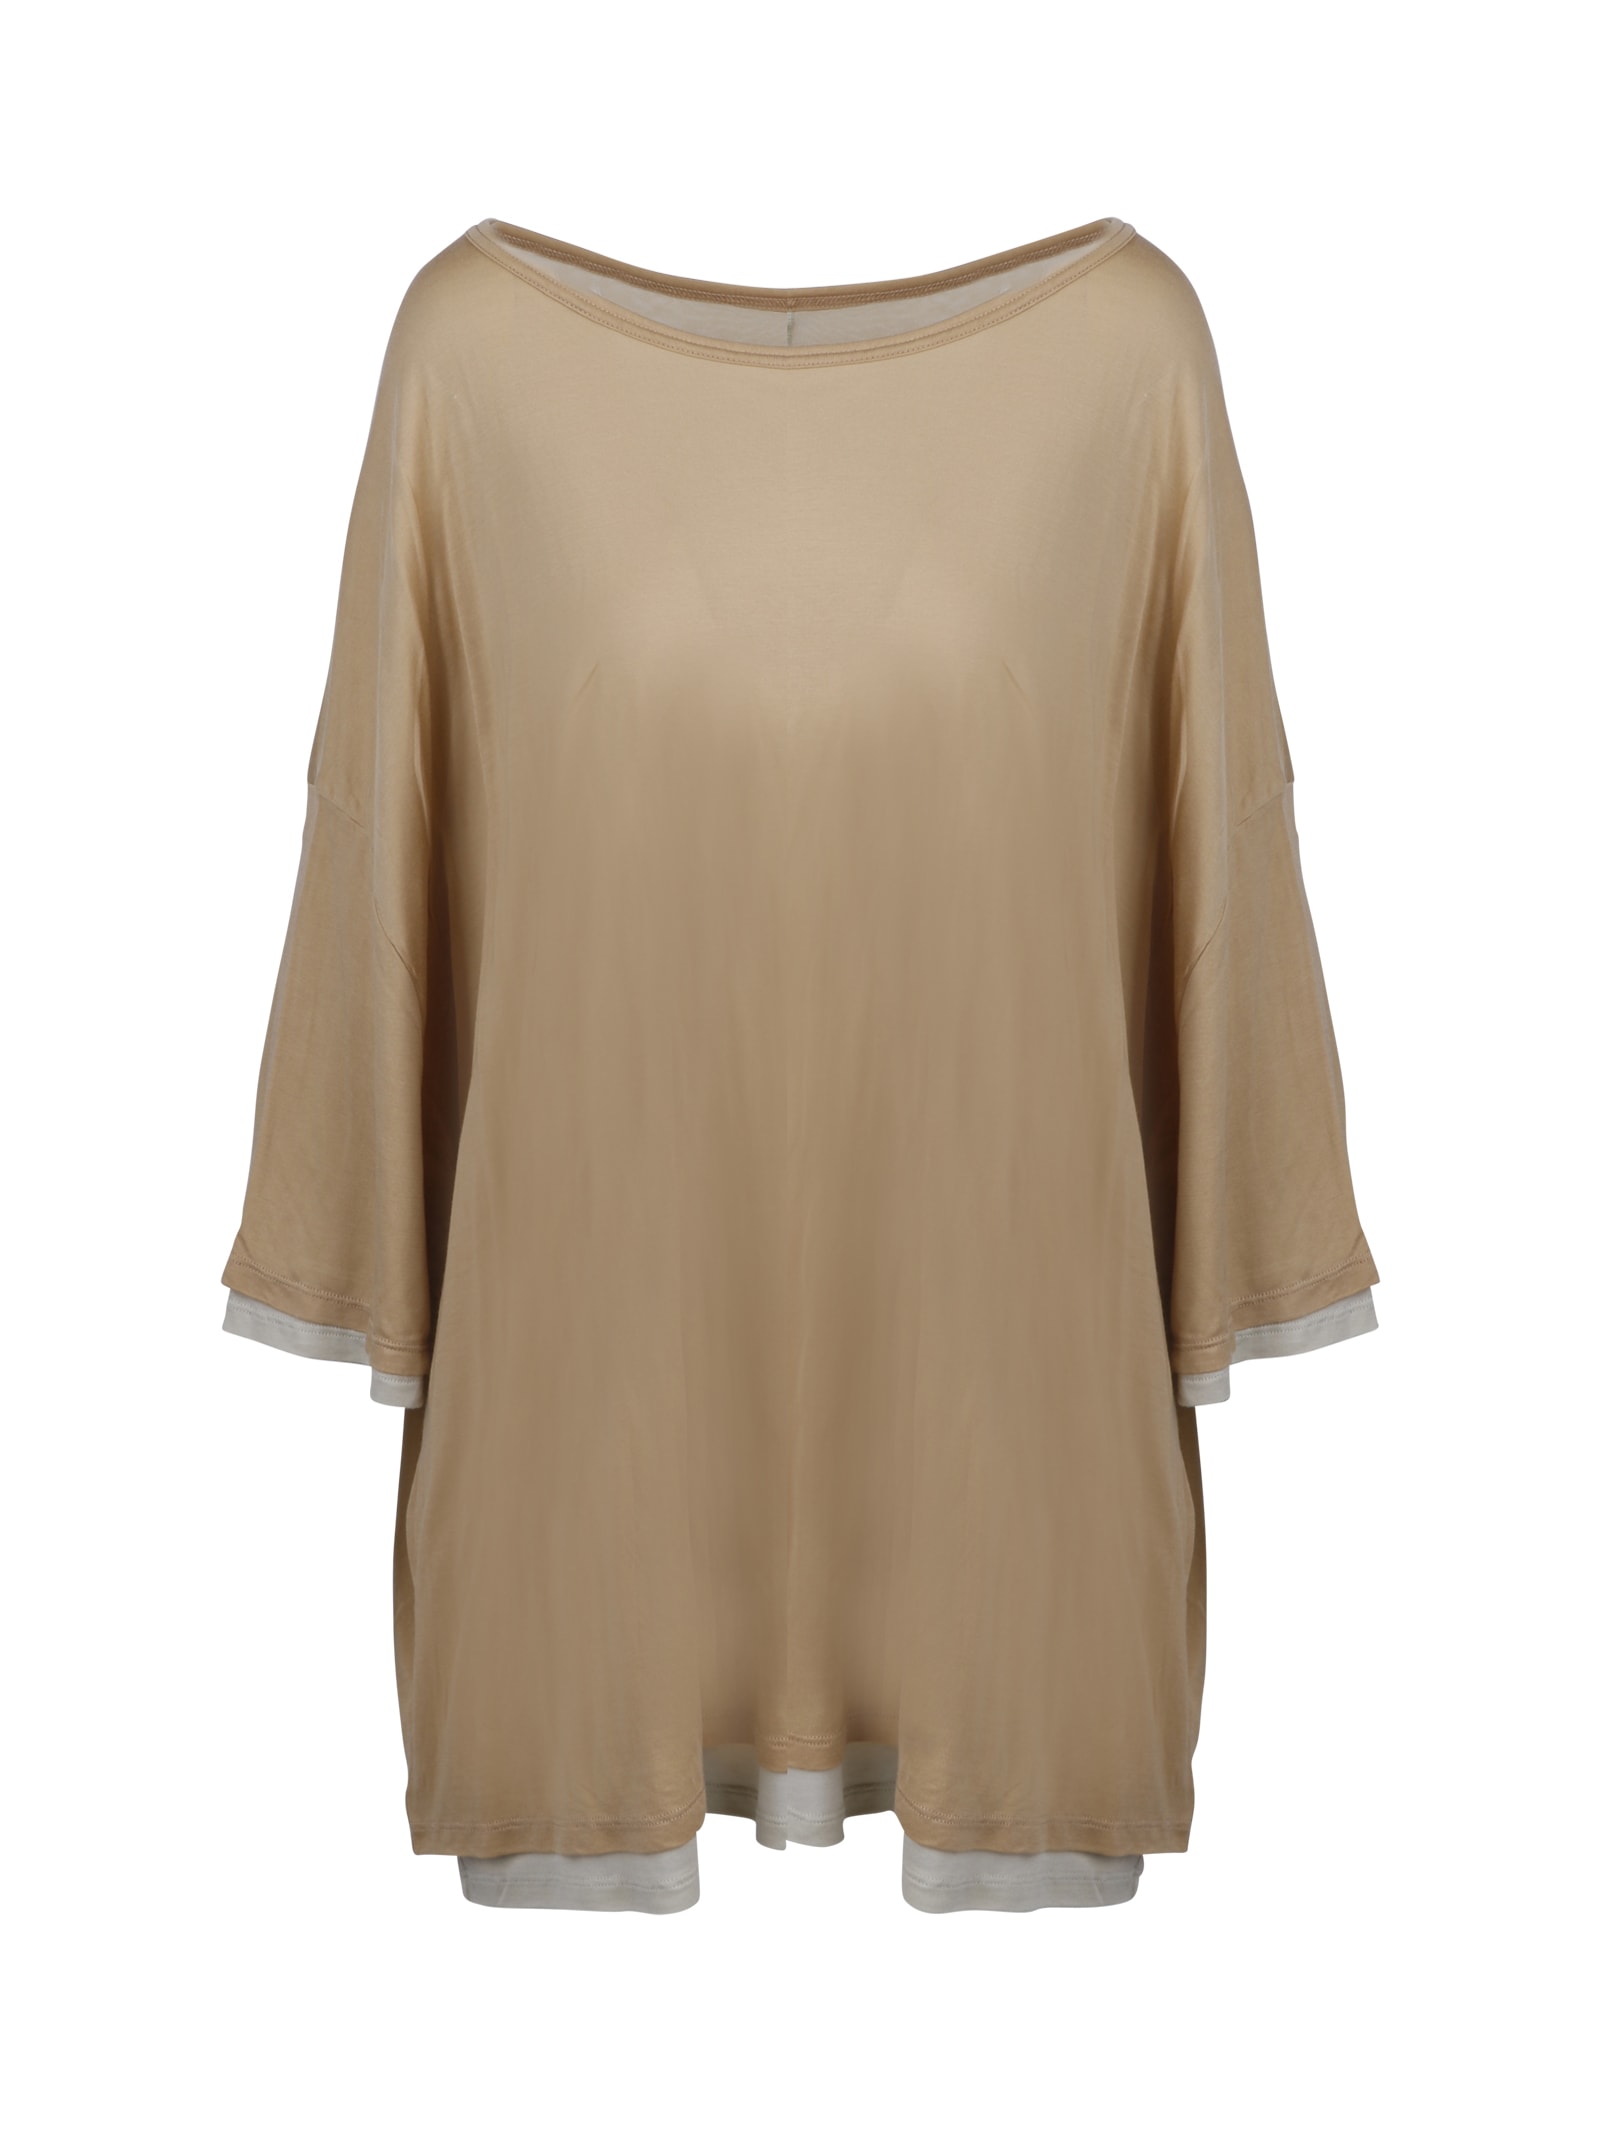 Rundholz Label Oversized T-shirt With Double Layer | italist, ALWAYS LIKE